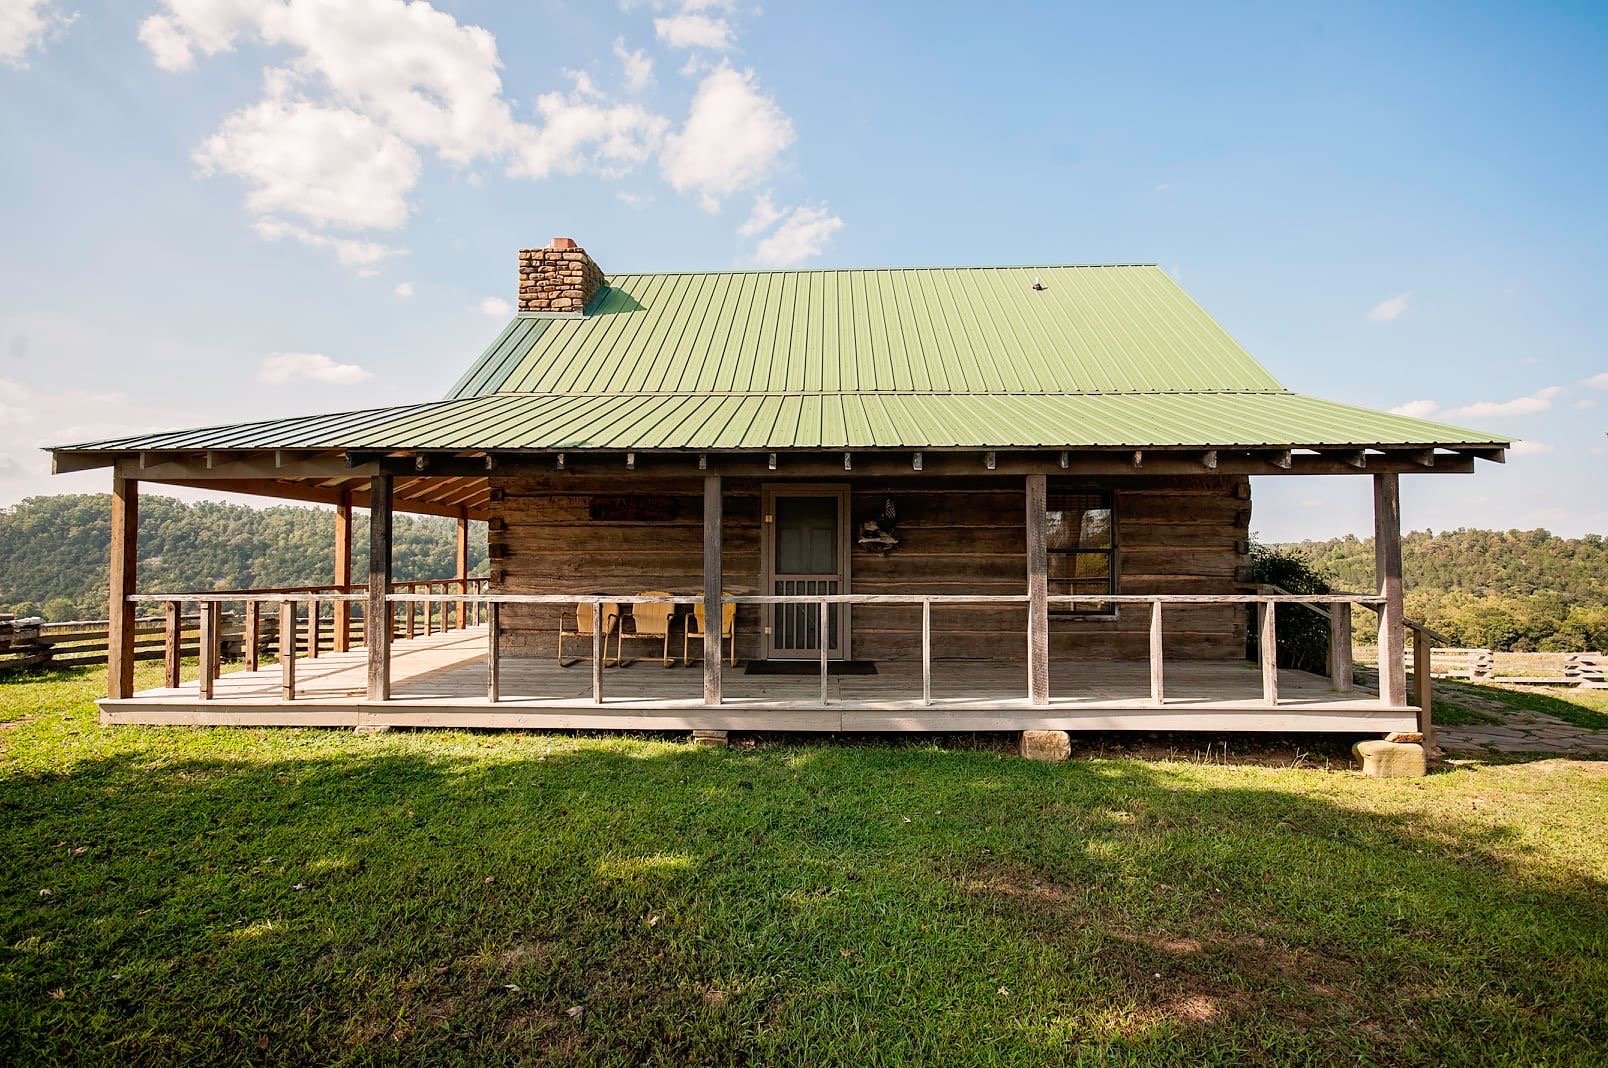 Nostalgic pioneer log cabin showcases Ozark family heritage and traditions.